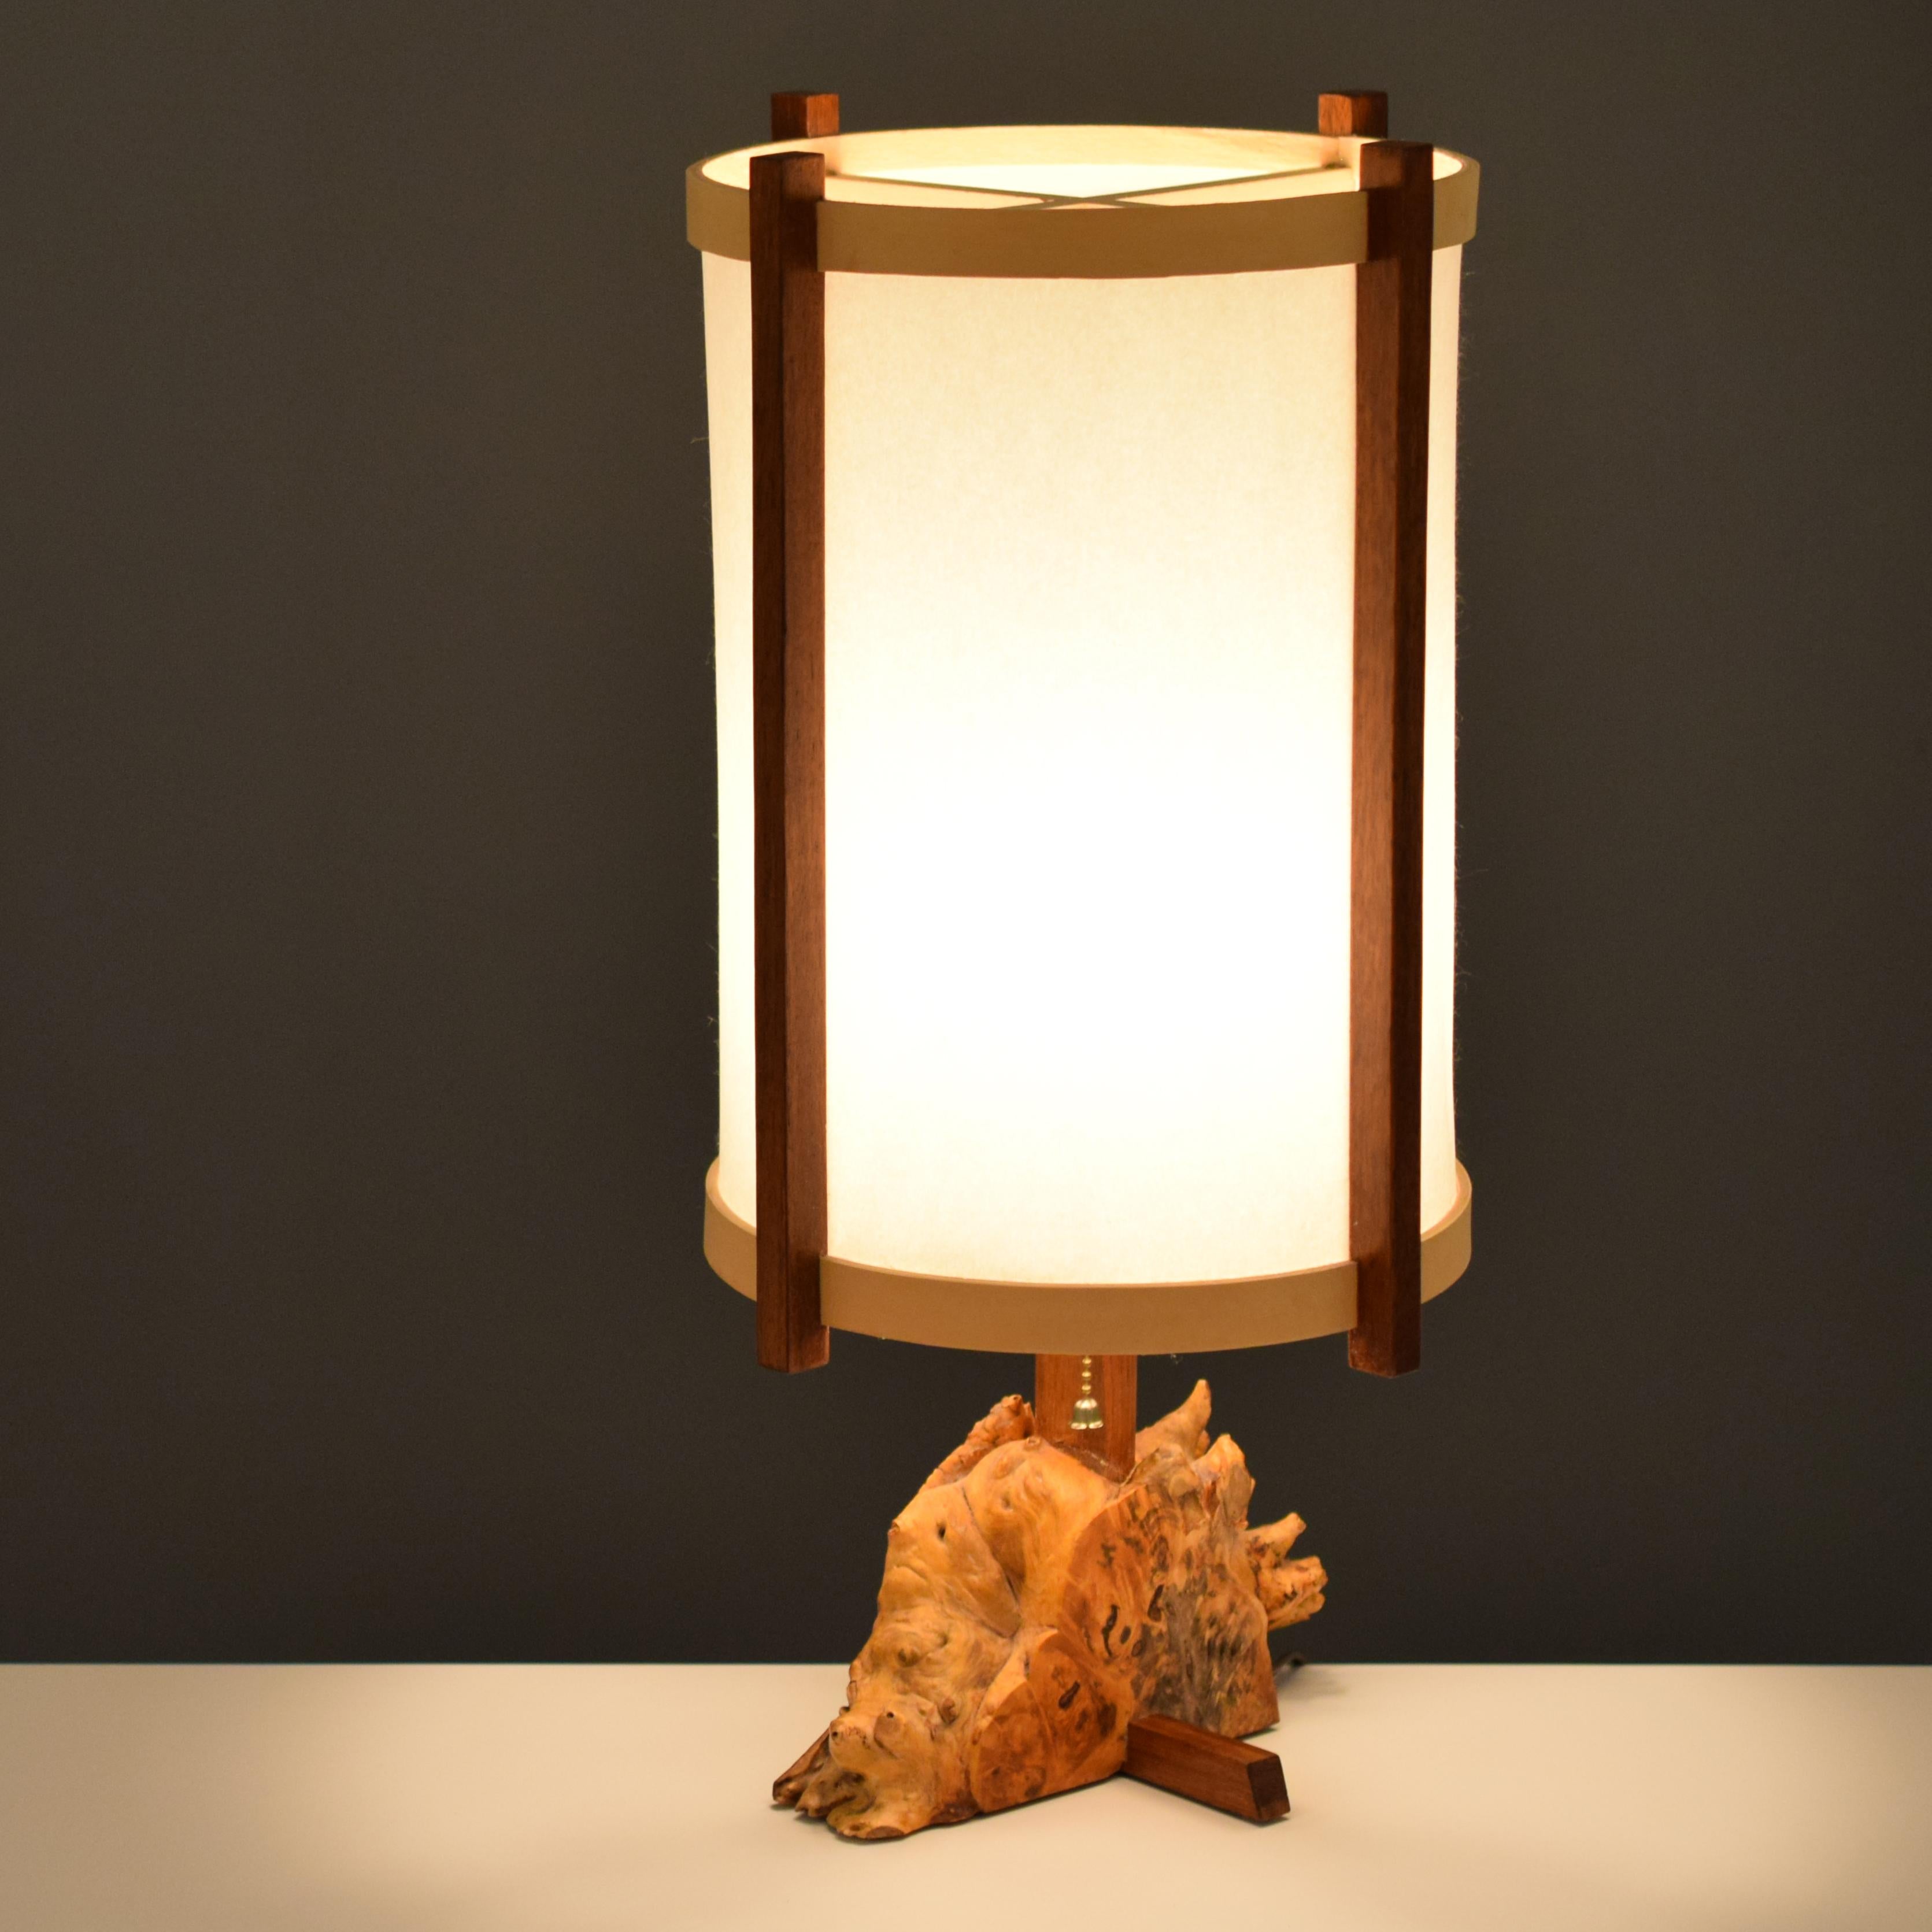 This lamp has an unusually complex burl base that exemplifies the mastery of Nakashima's amazing selection of woods for his pieces.